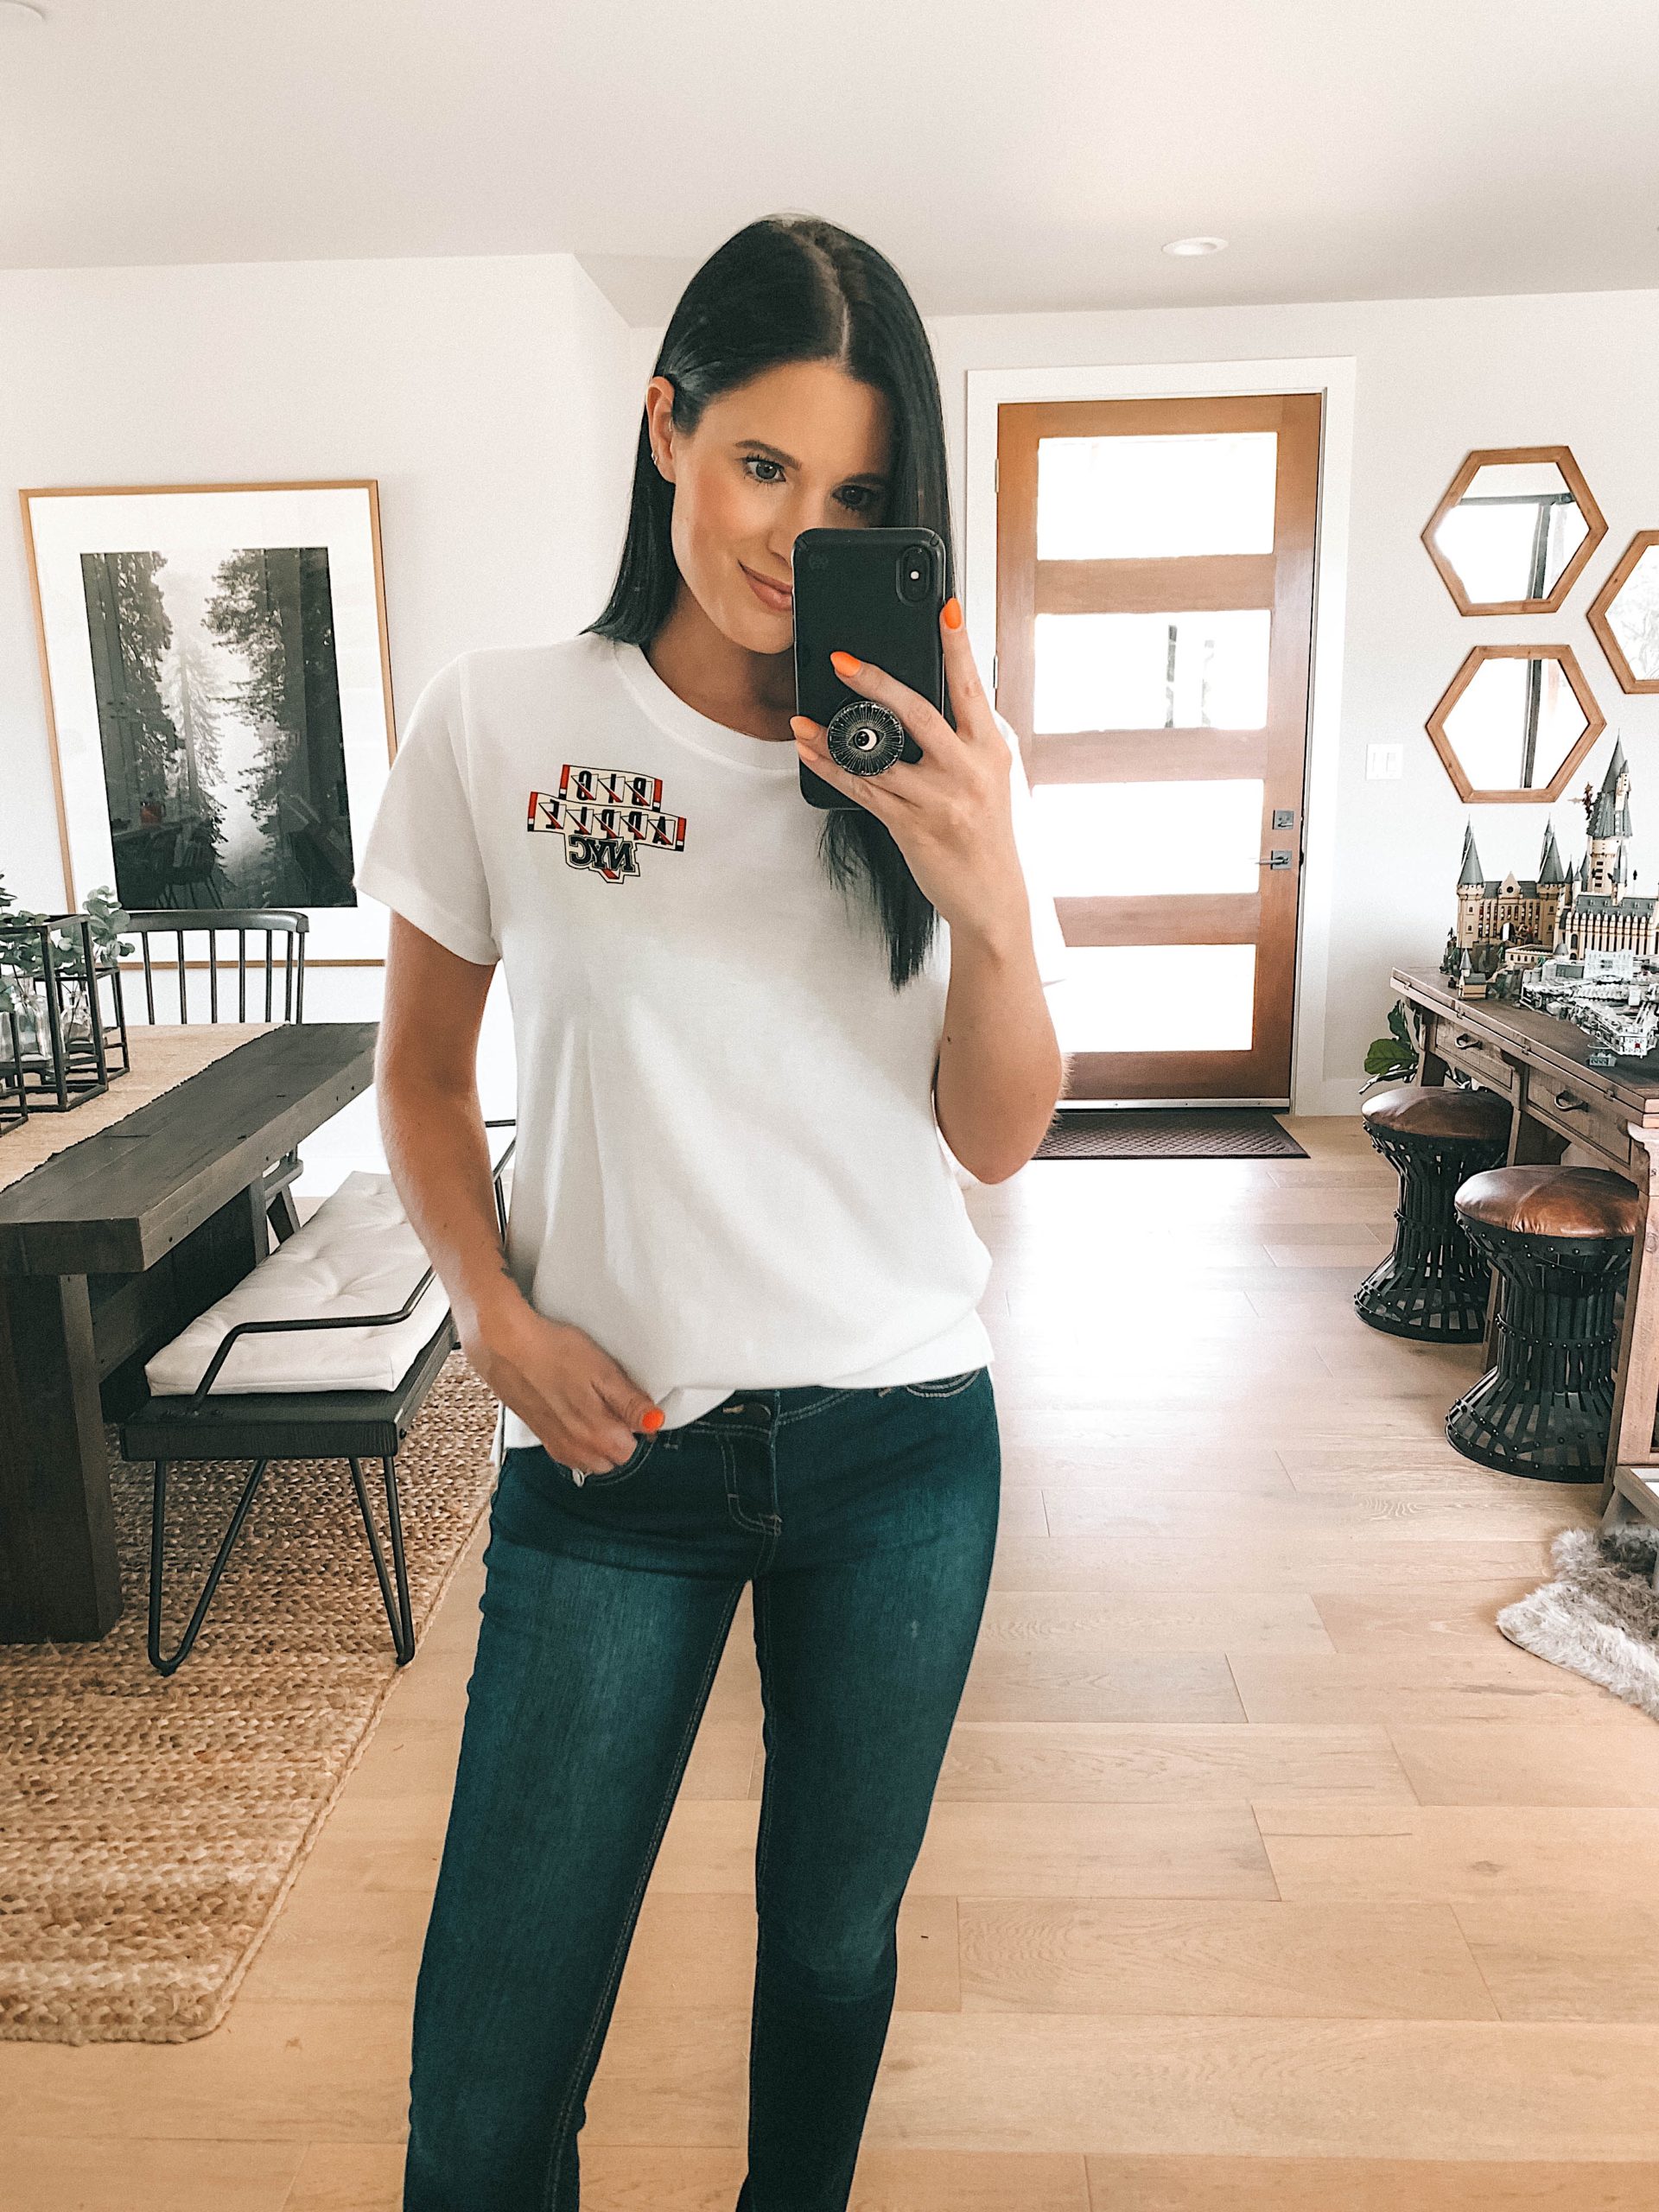 Walmart Jordache by popular Austin fashion blog, Dressed to Kill: image of a woman standing inside and wearing a Walmart Jordache VINTAGE Big Apple NYC shirt and jeans. 